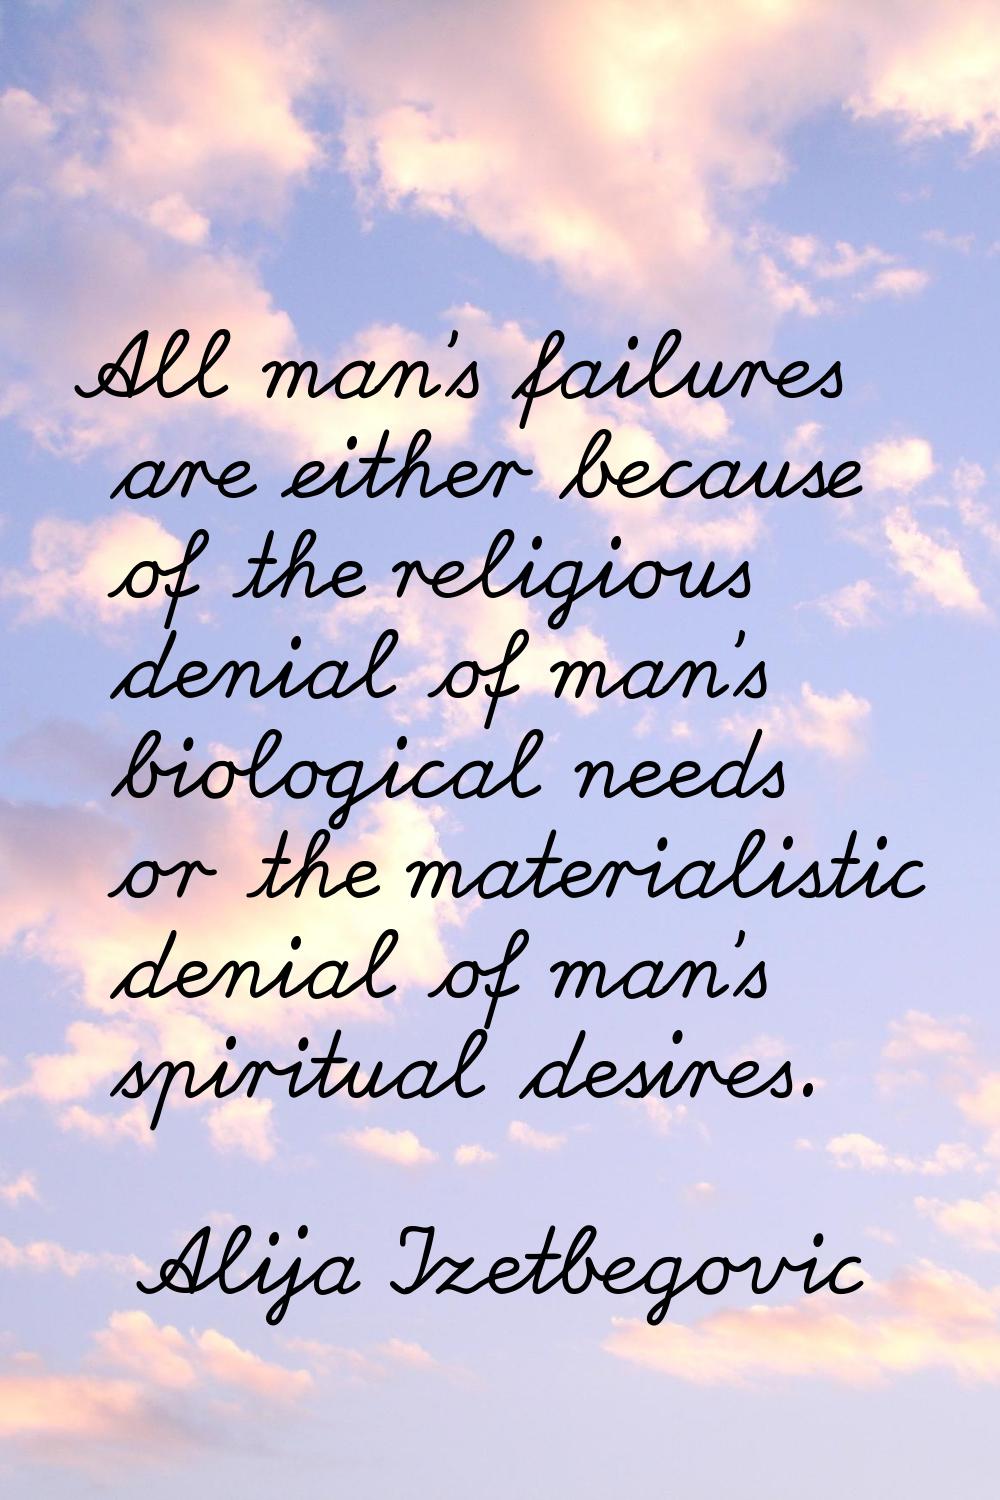 All man's failures are either because of the religious denial of man's biological needs or the mate